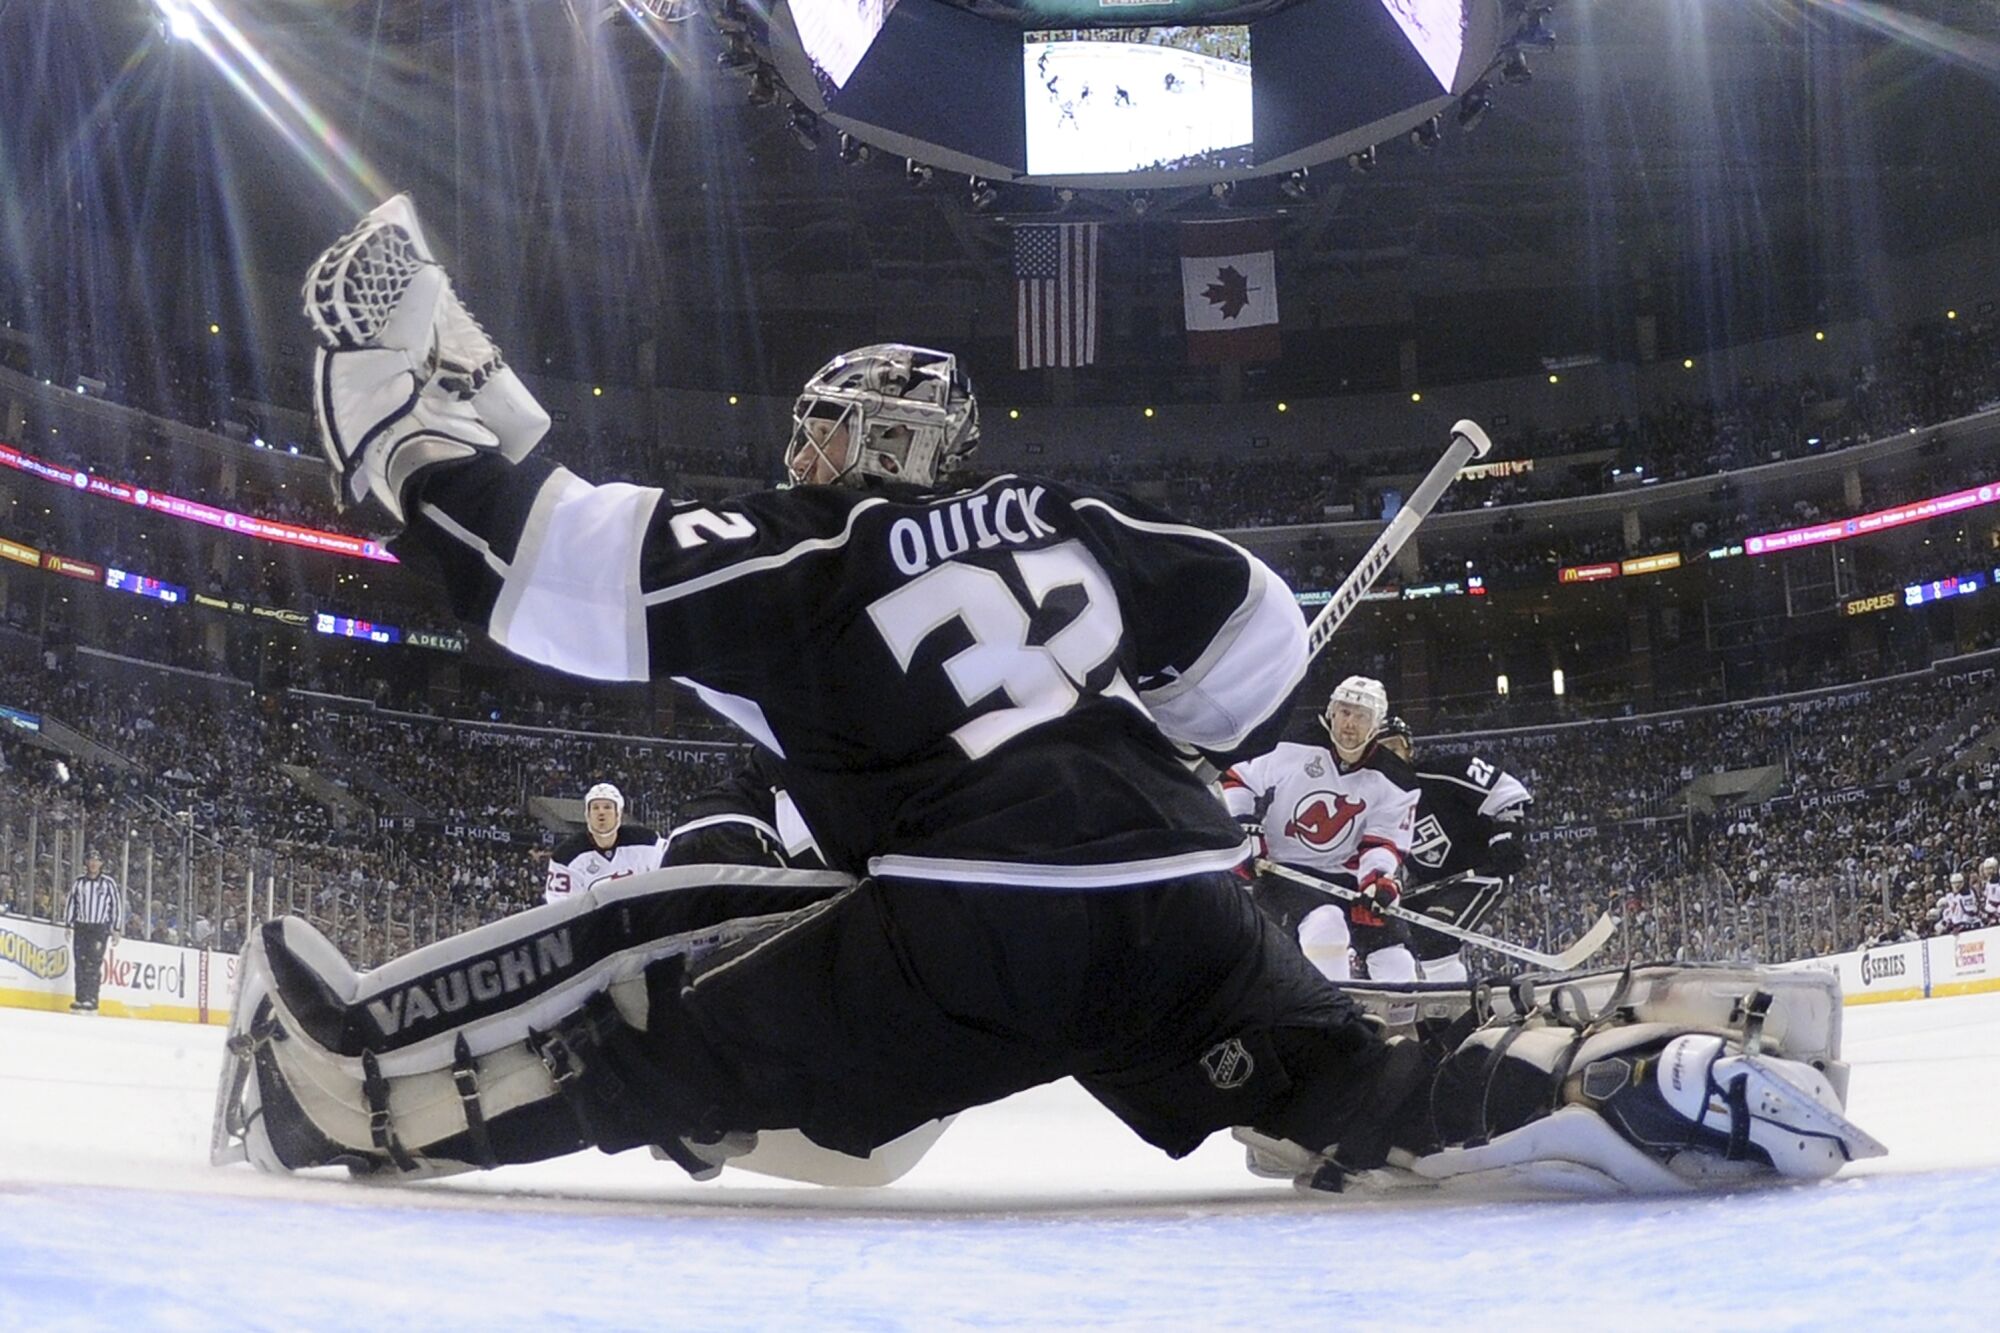 Kings goalie Jonathan Quick makes a glove save during the 2012 Stanley Cup Final against the New Jersey Devils.